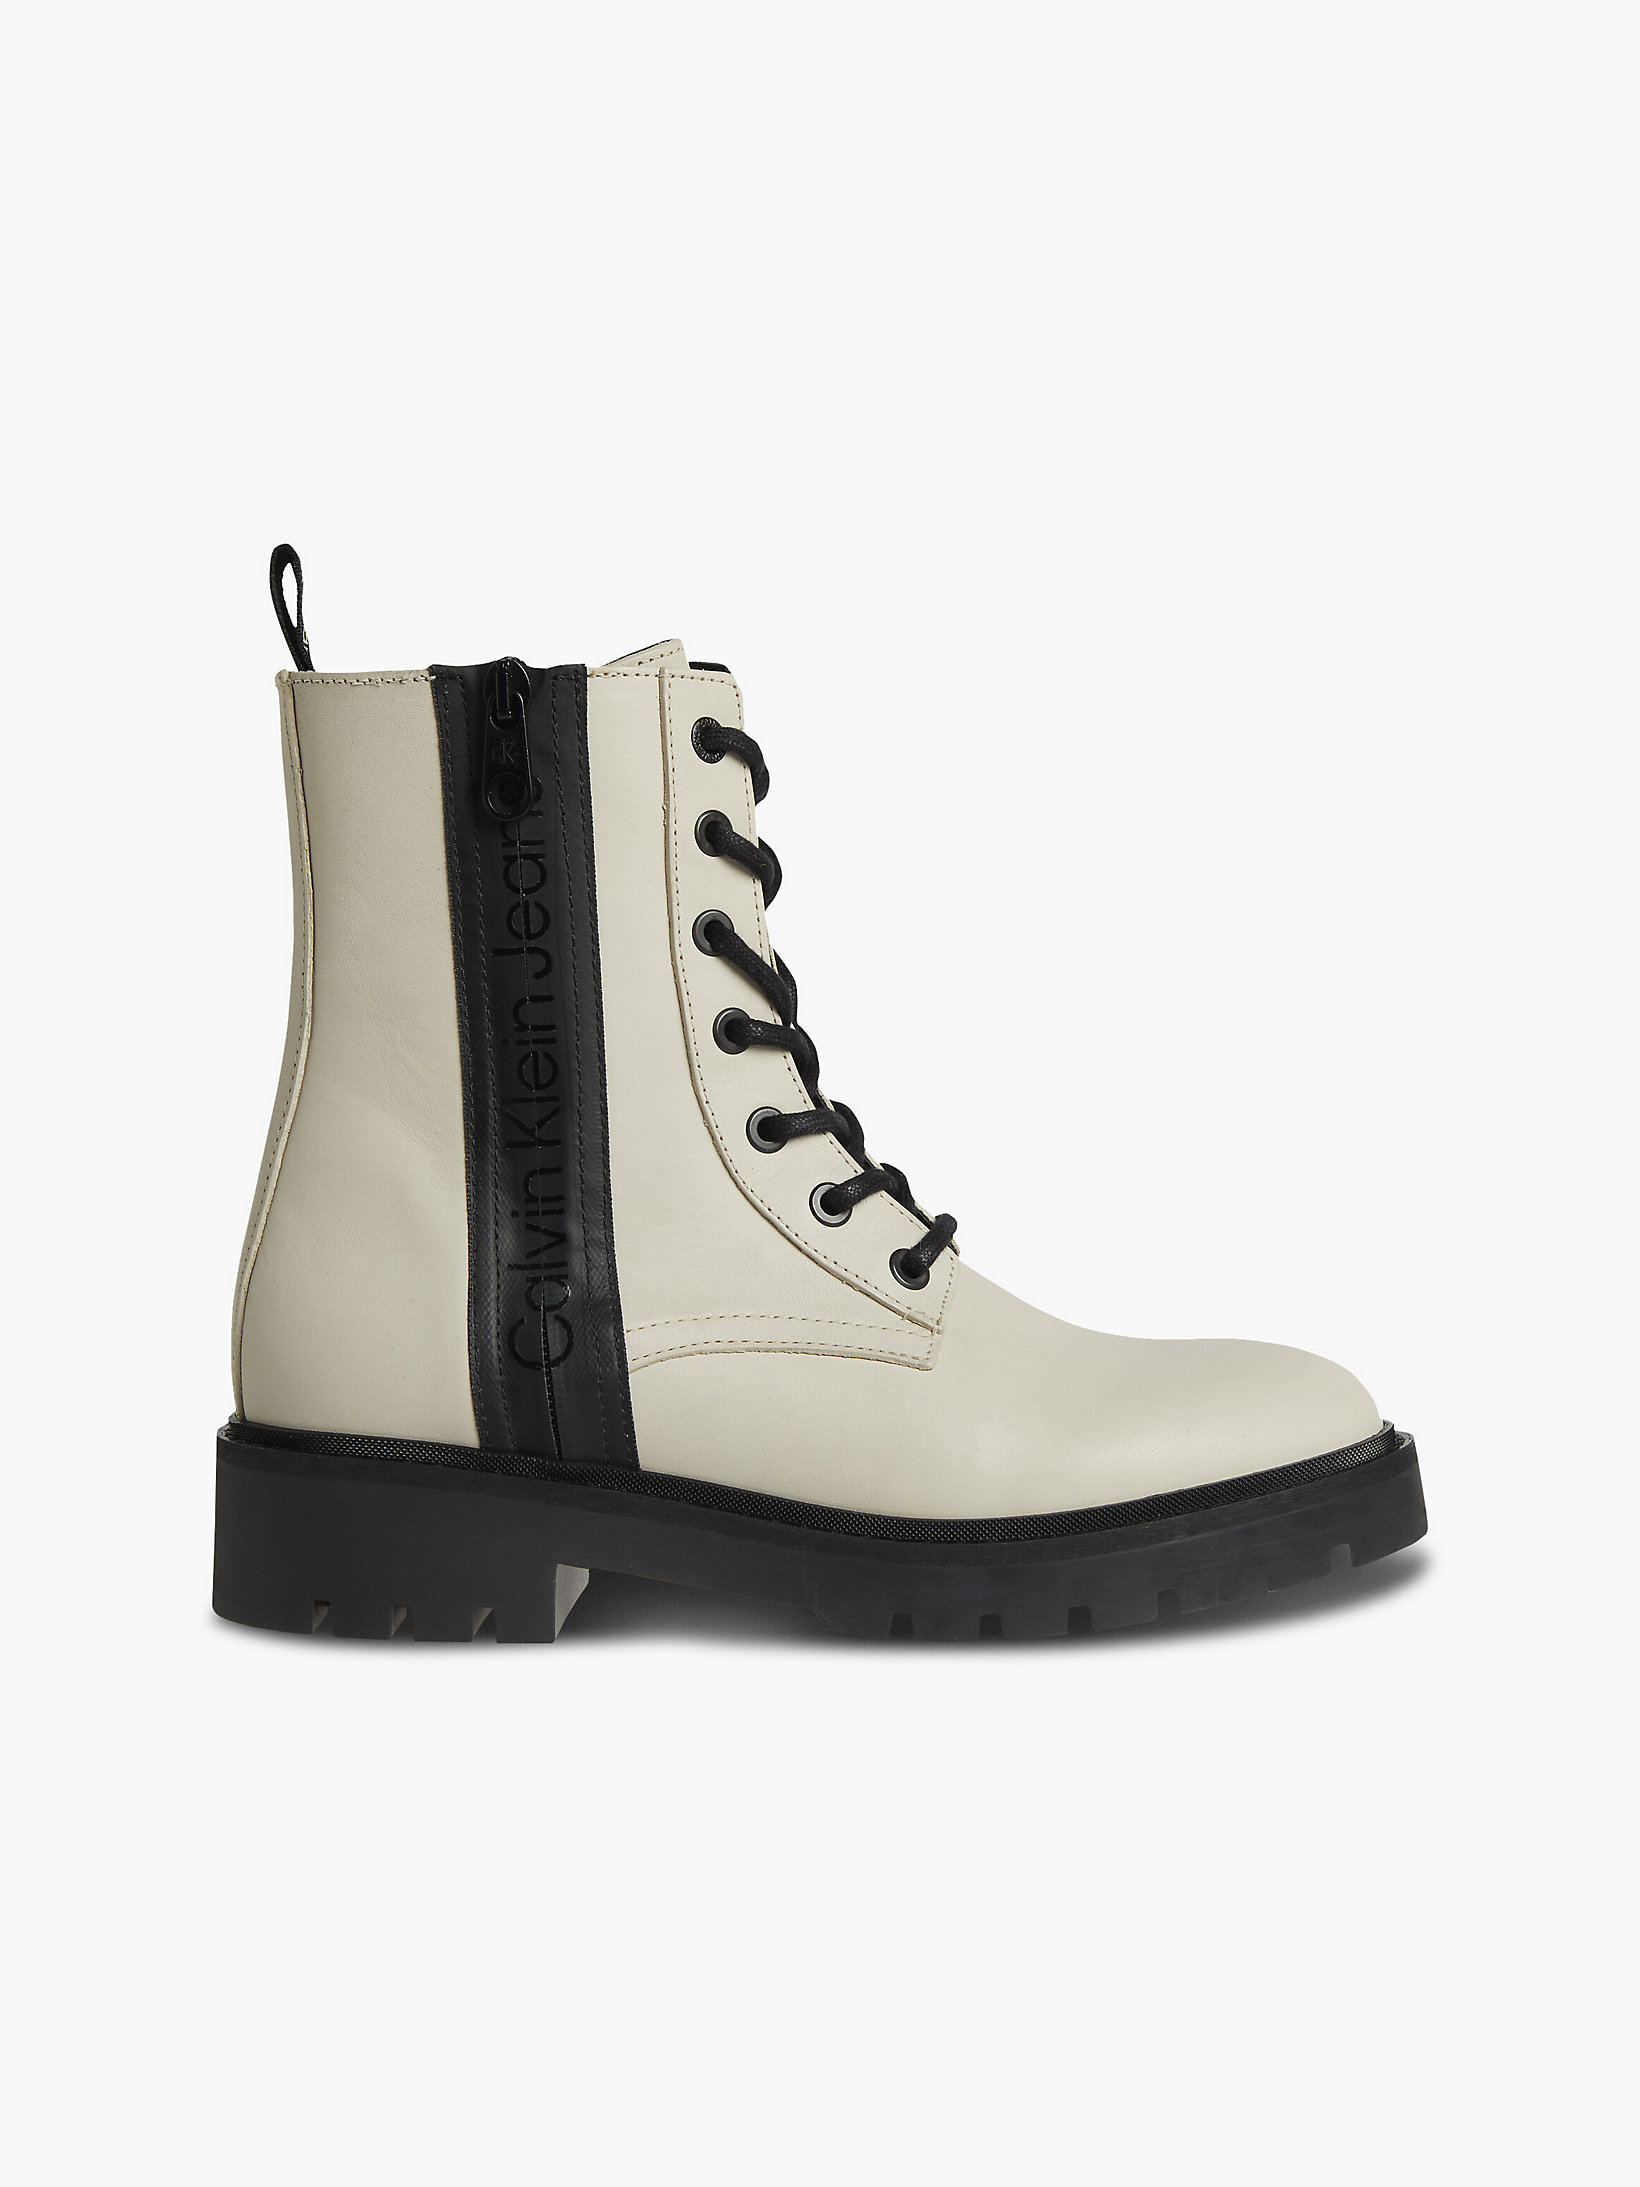 Eggshell Leather Boots undefined women Calvin Klein